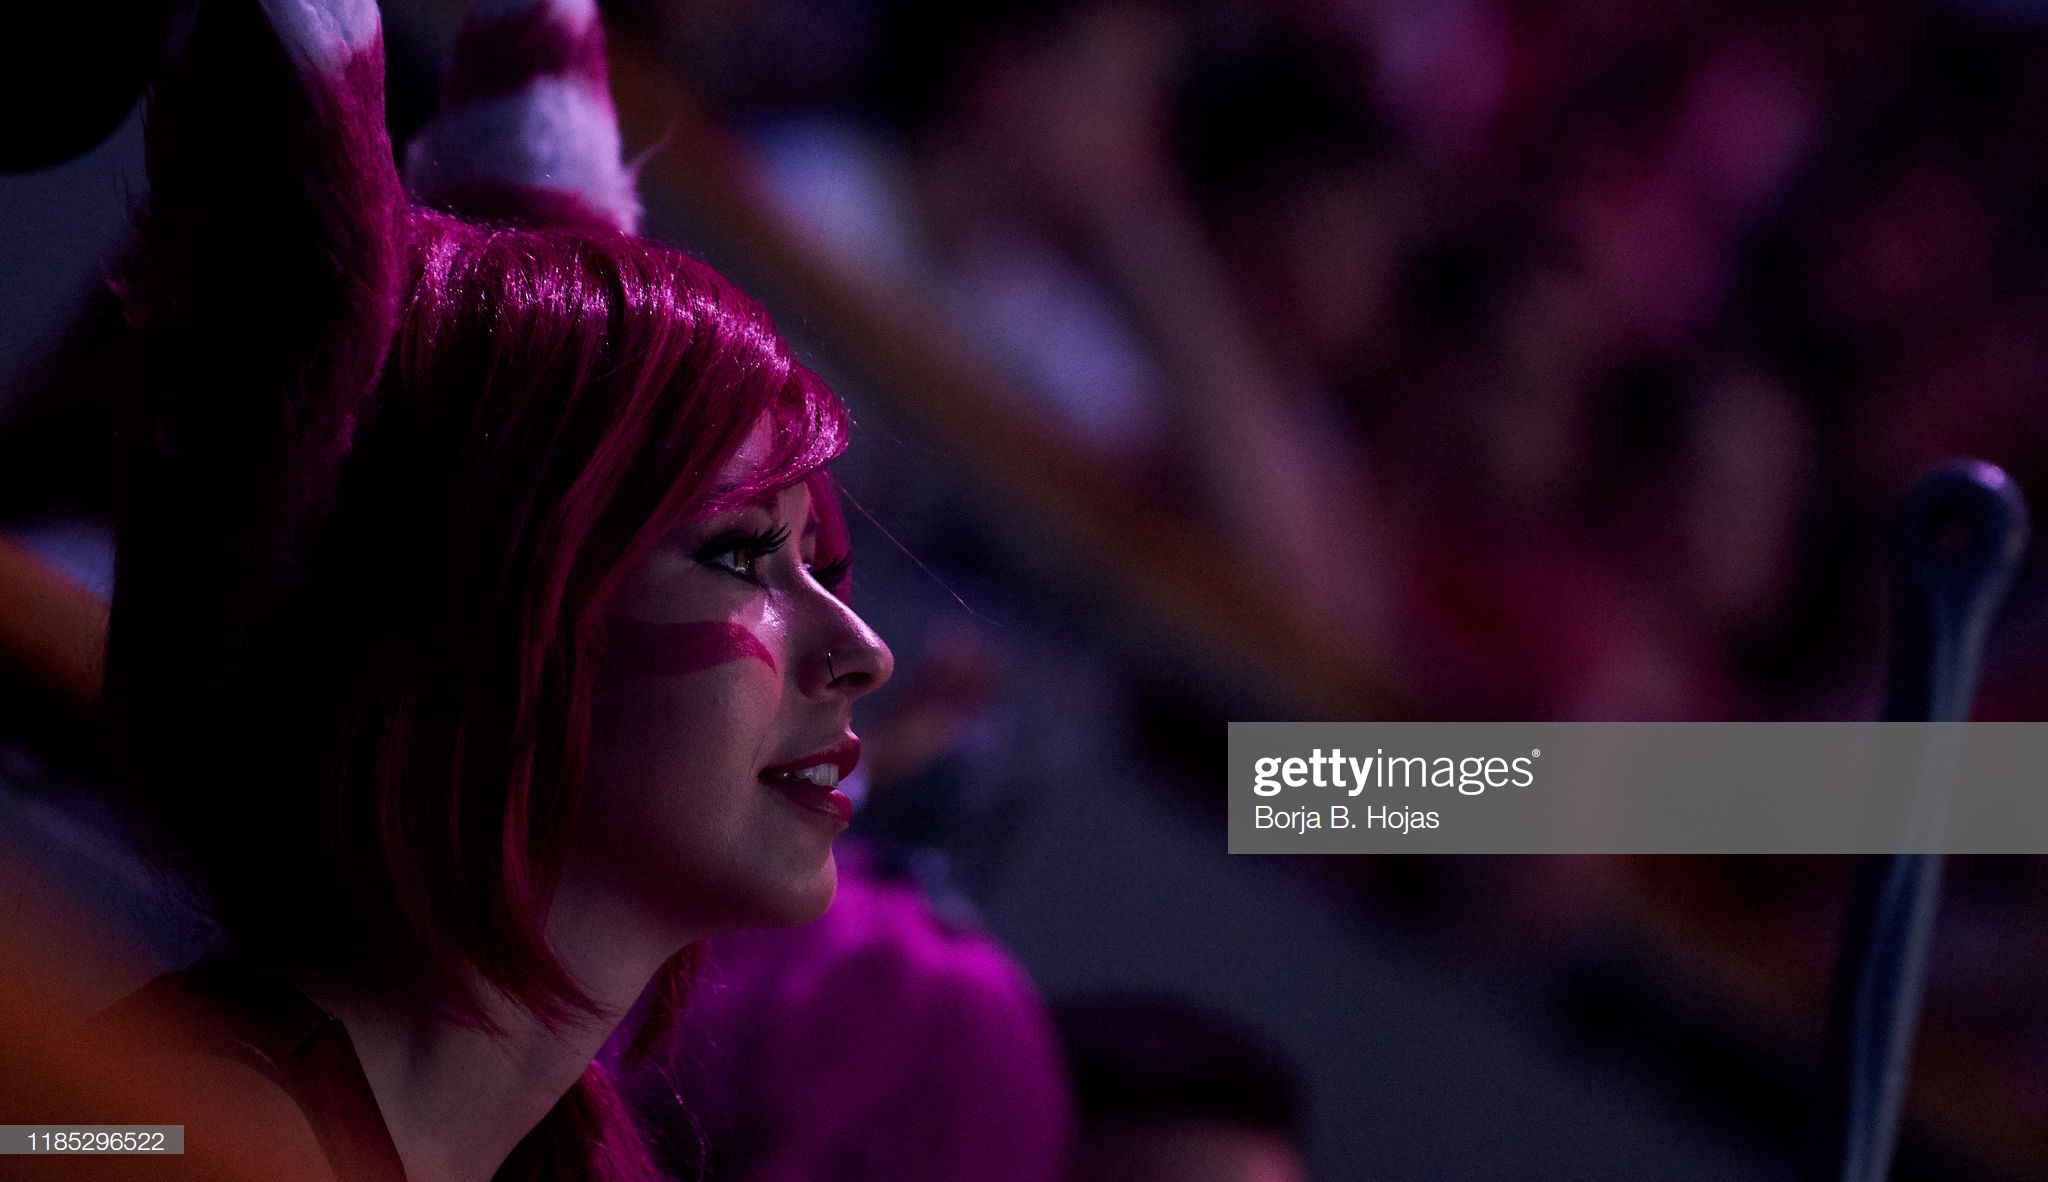 gettyimages-1185296522-2048x2048.jpg